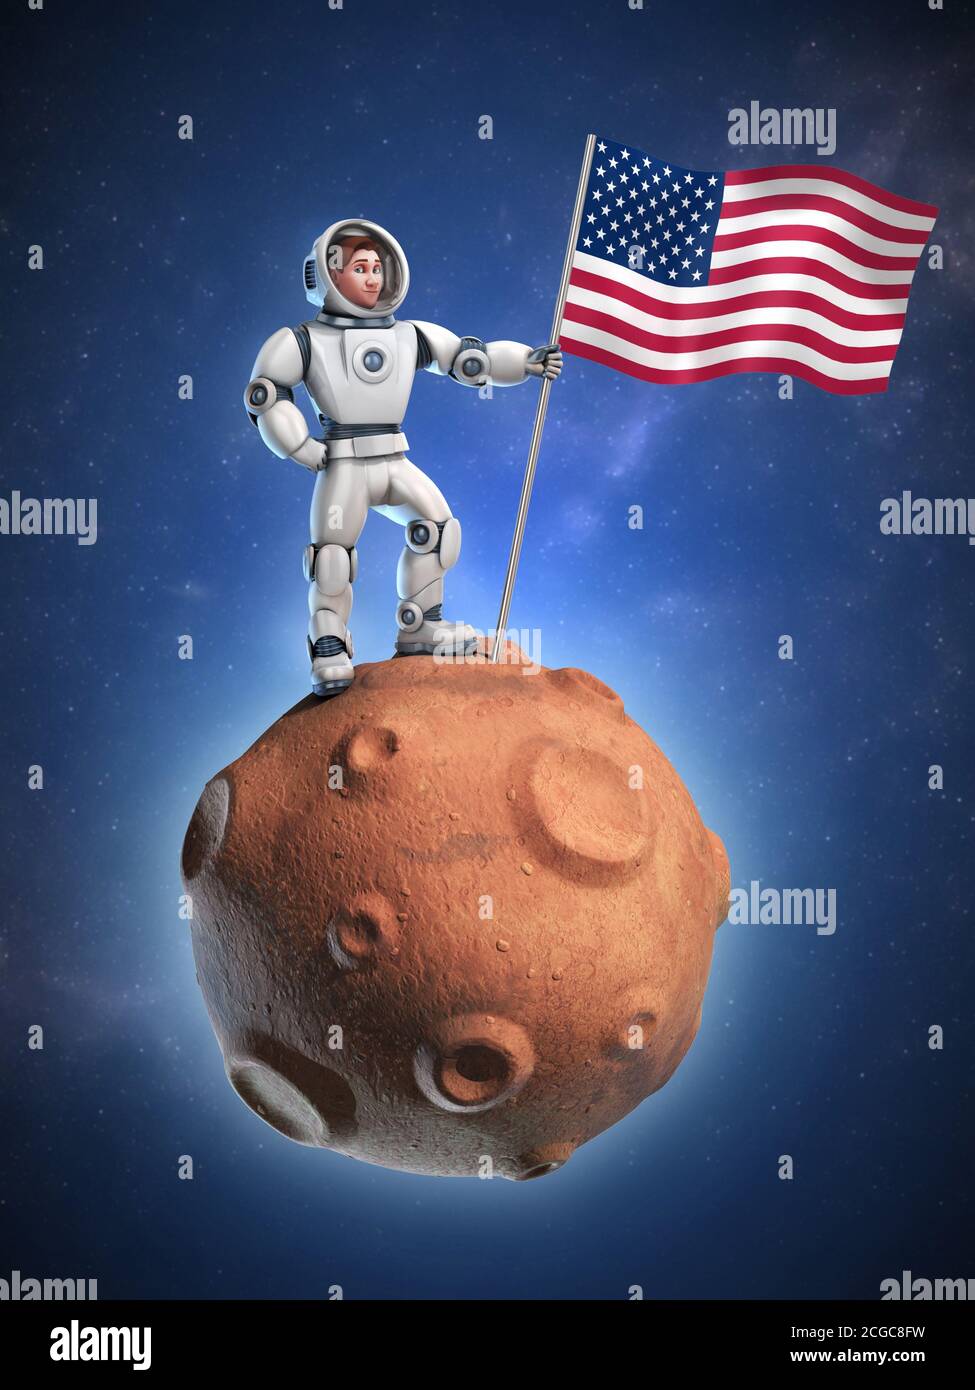 astronaut on meteor holding the American flag Stock Photo